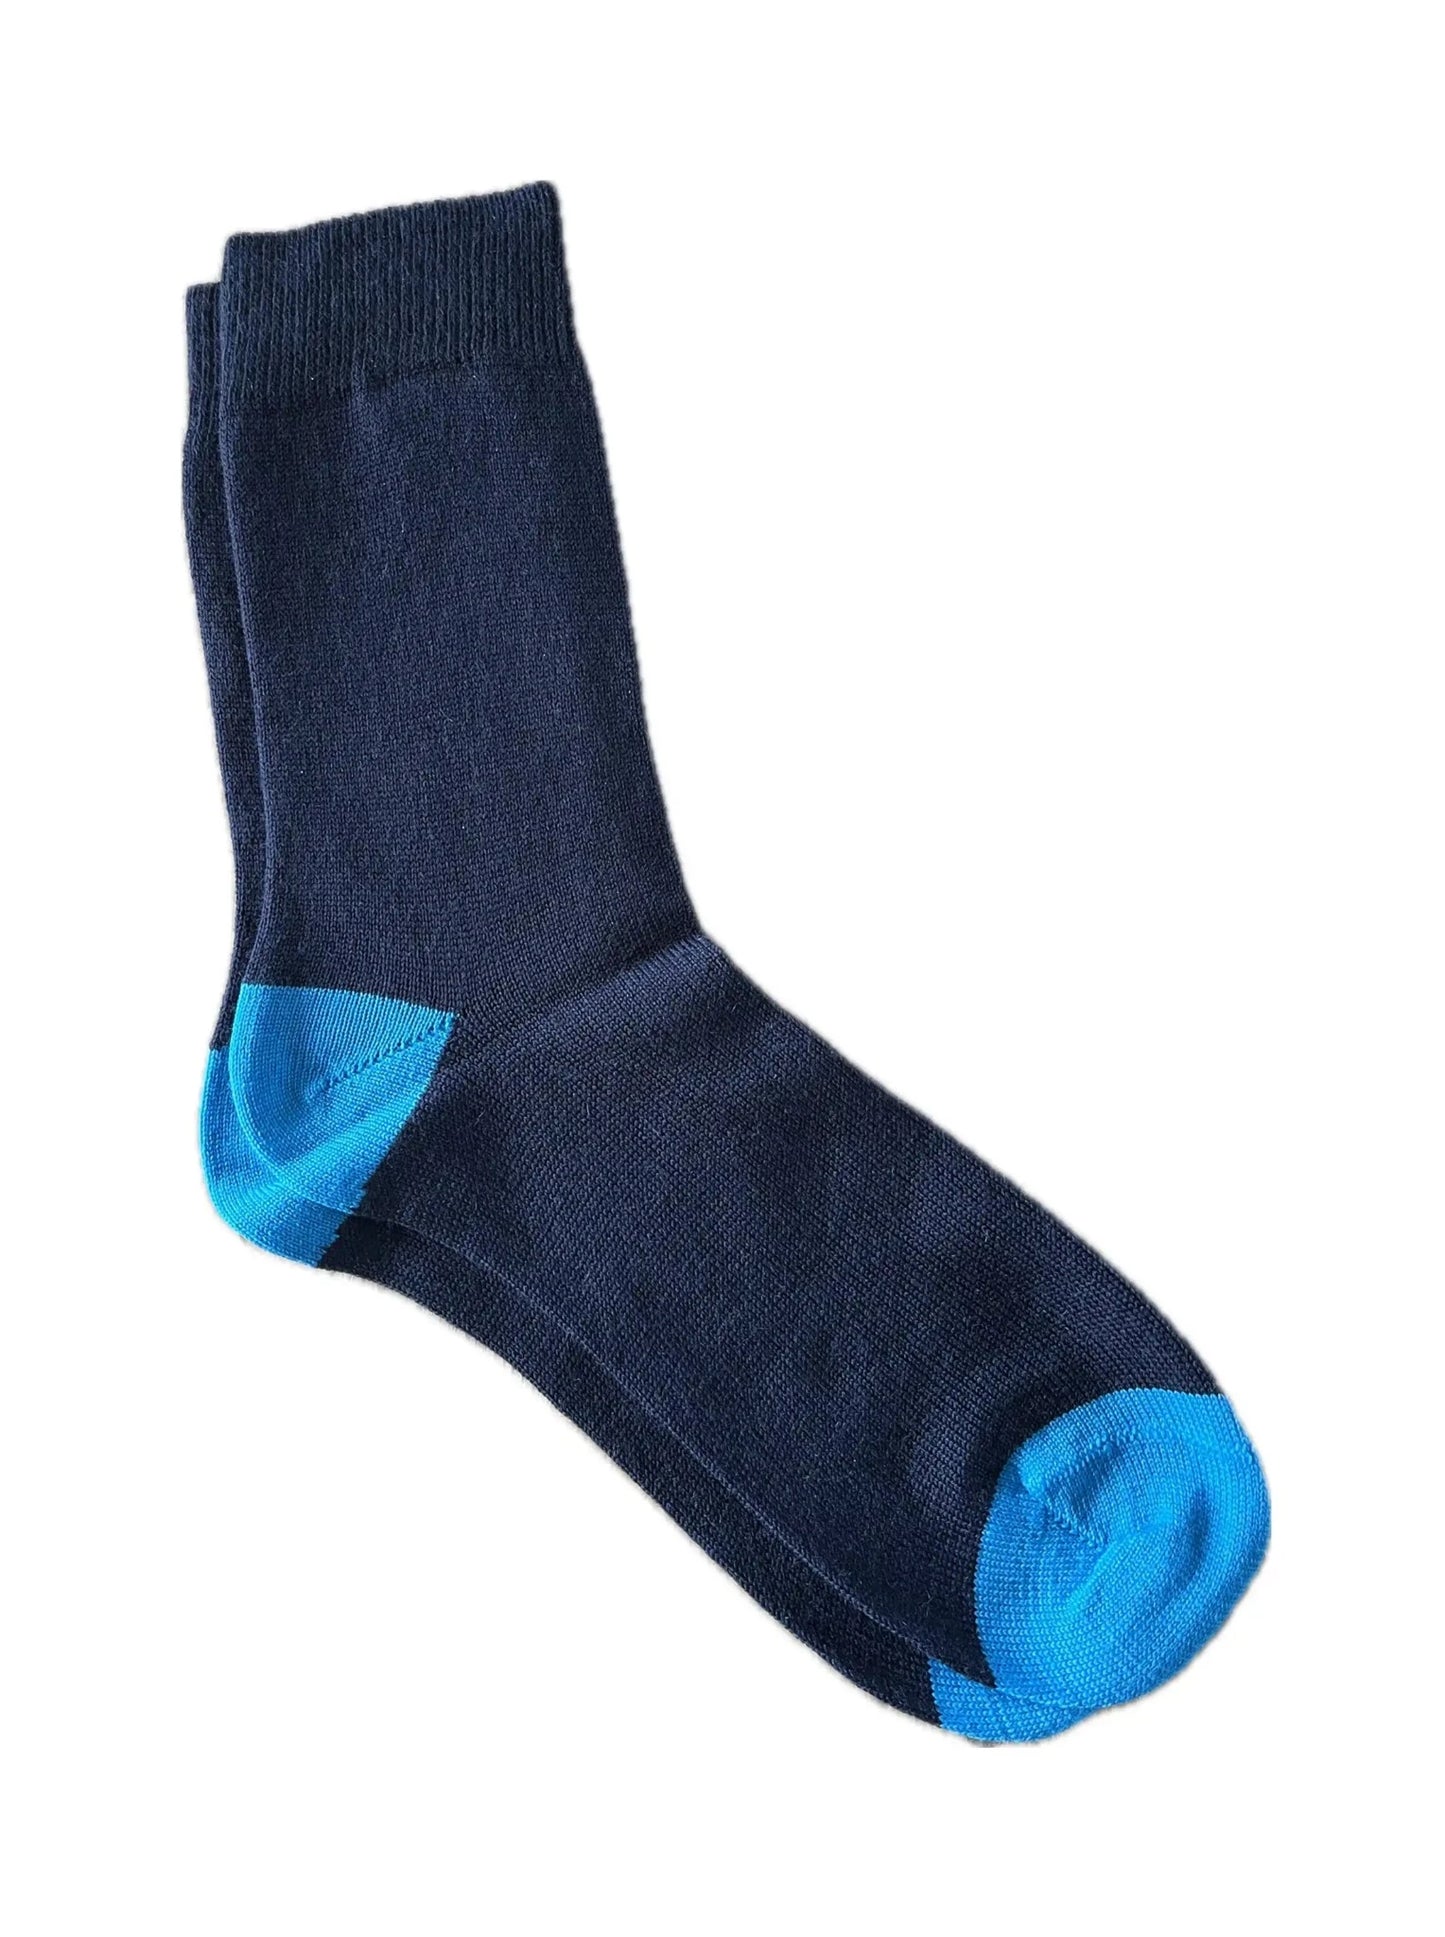 Men's everyday wool sock in navy with turquoise made in UK from Misty Cashmere